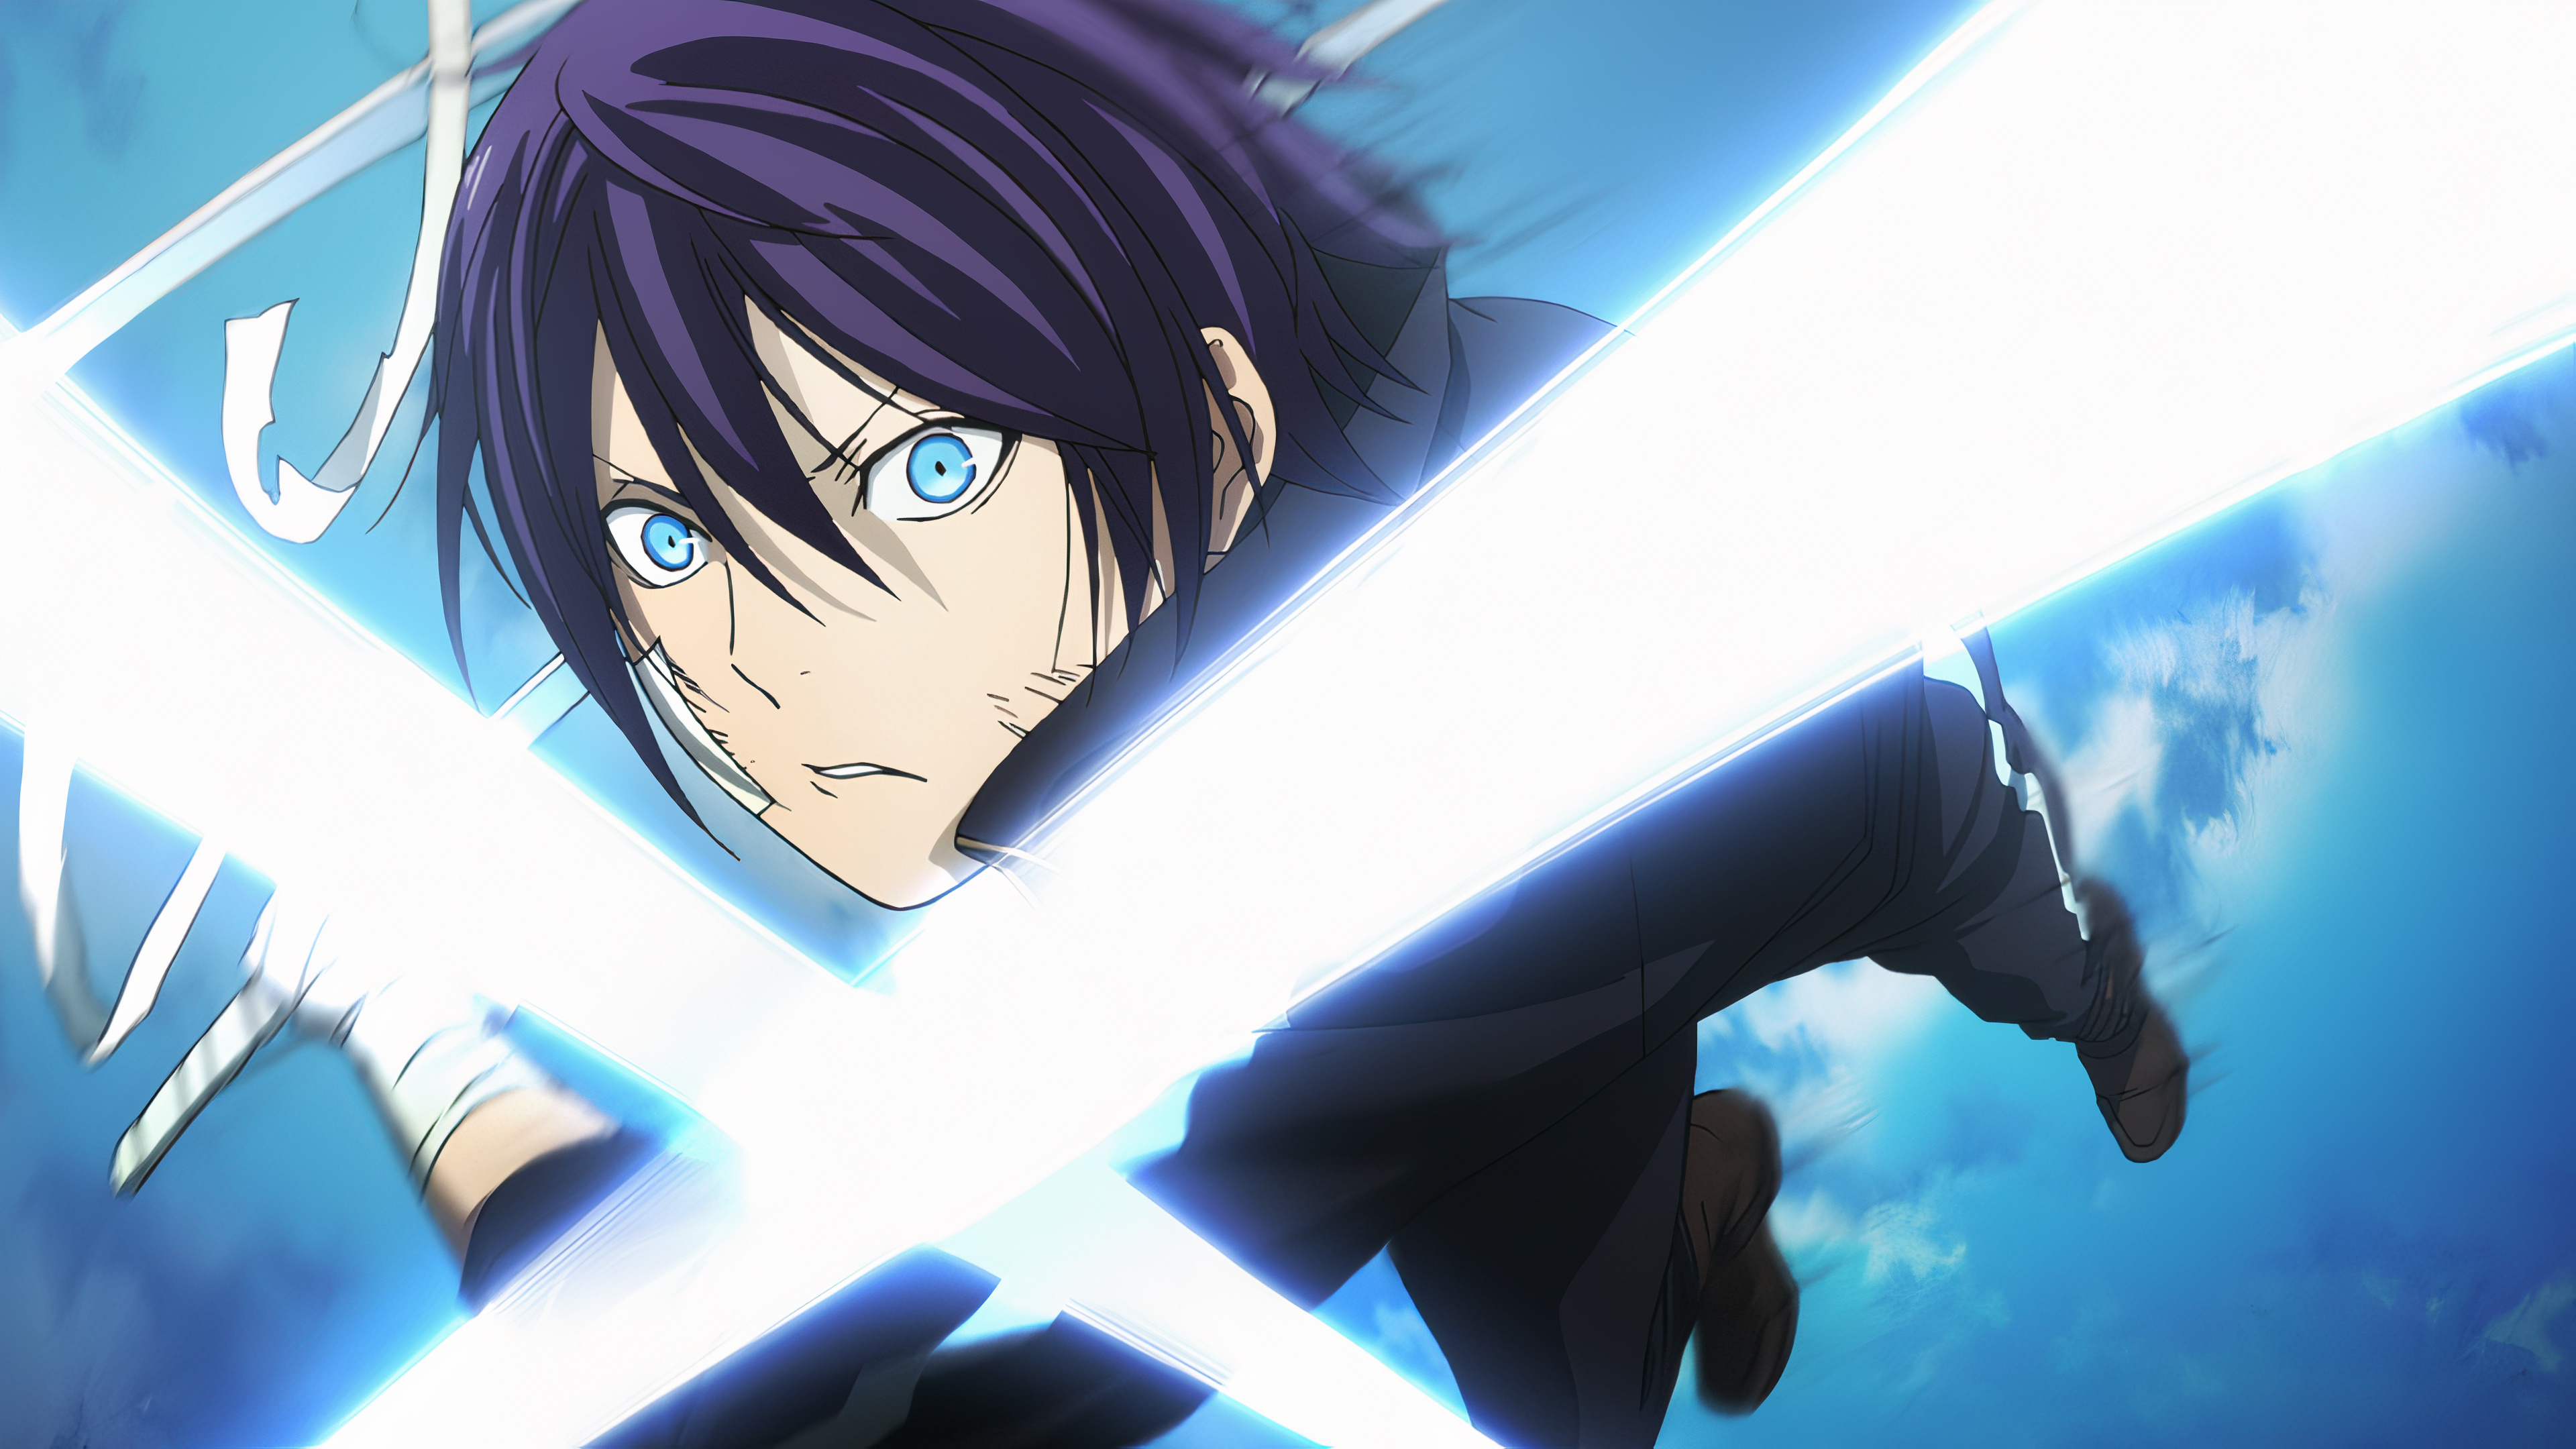 Anime Noragami HD Wallpaper | Background Image